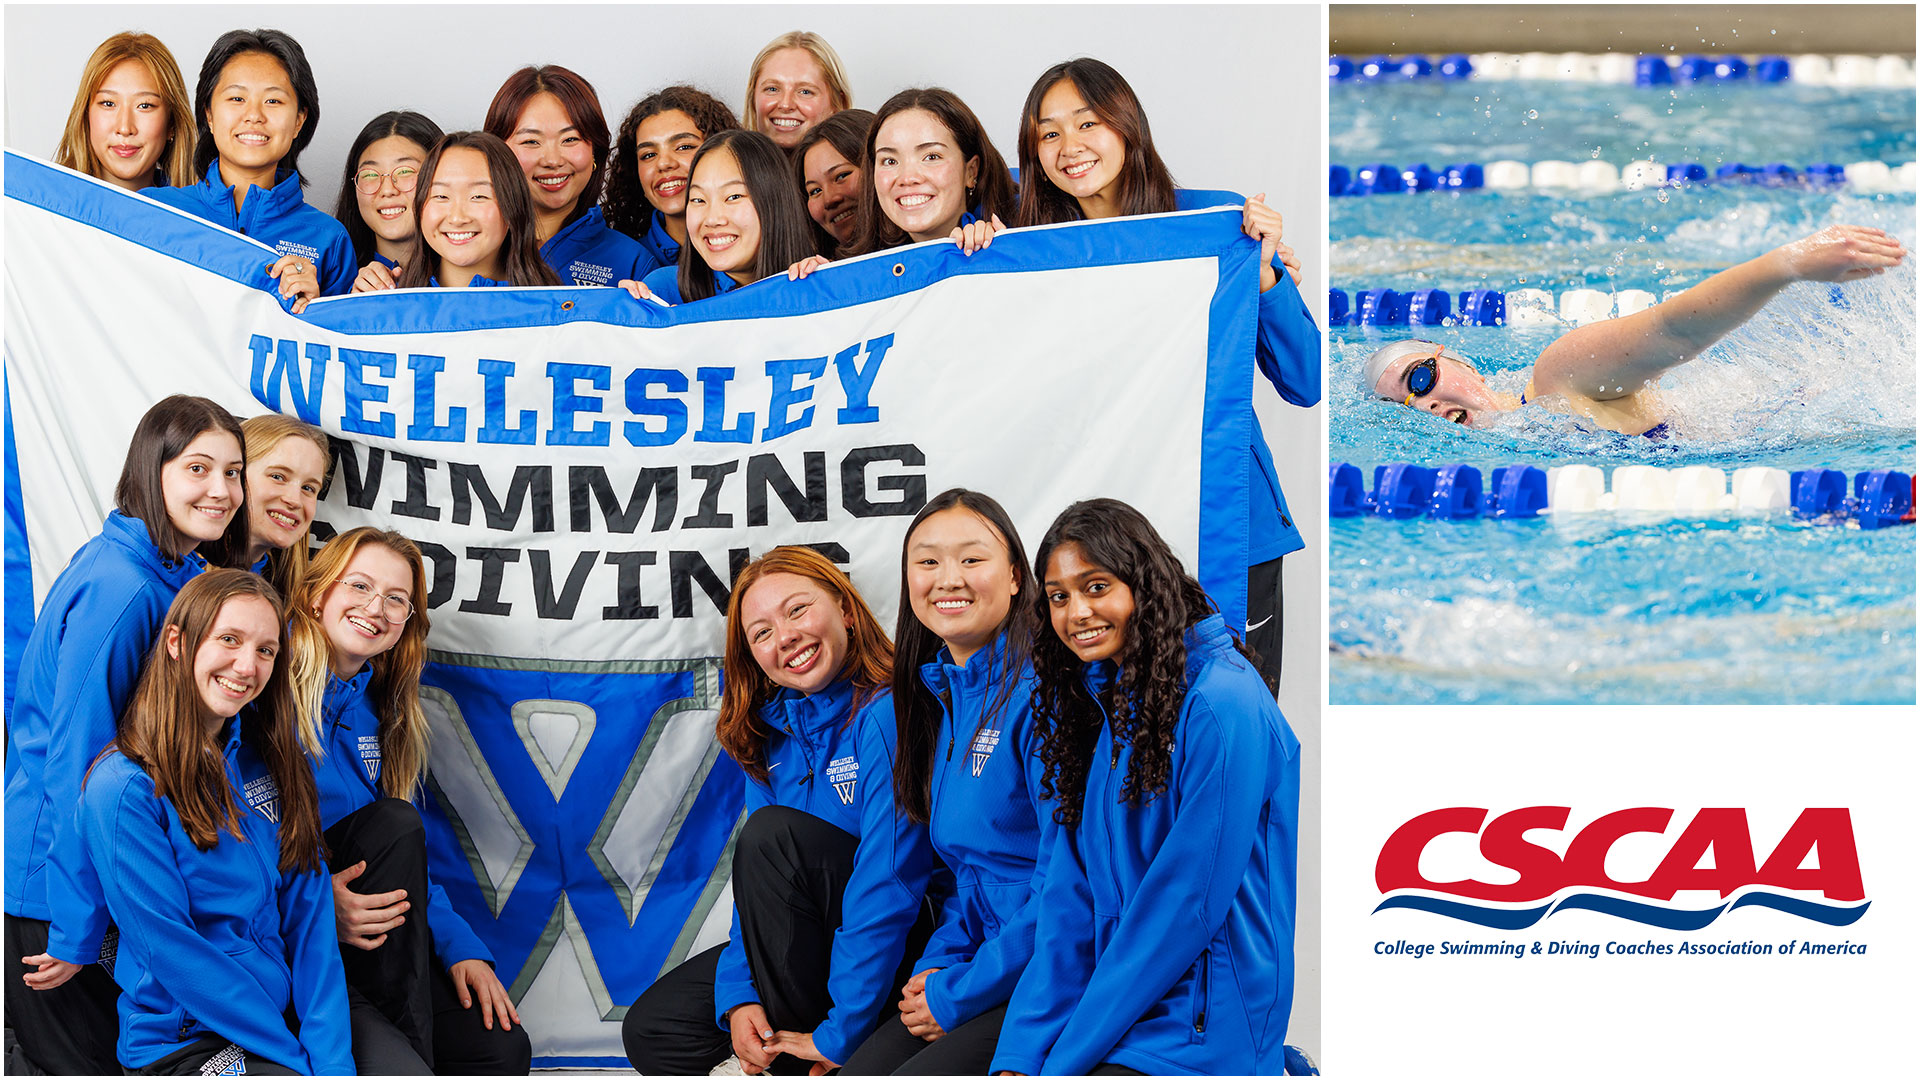 Wellesley swimming & diving was named a CSCAA Scholar All-American Team for the 11th straight year (Frank Poulin)